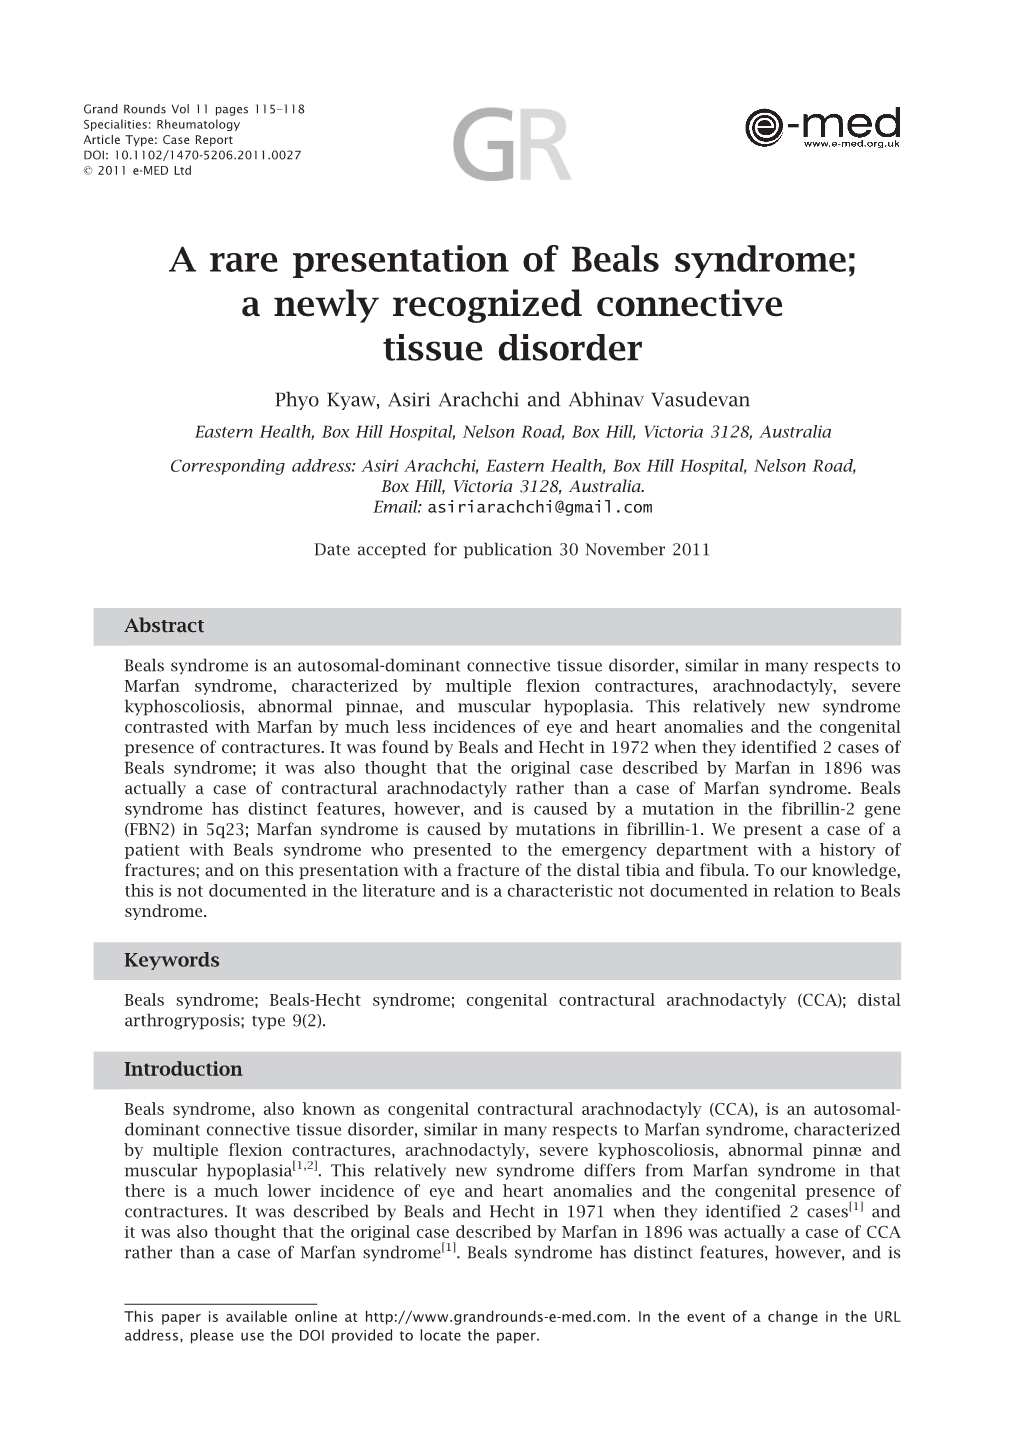 A Rare Presentation of Beals Syndrome; a Newly Recognized Connective Tissue Disorder